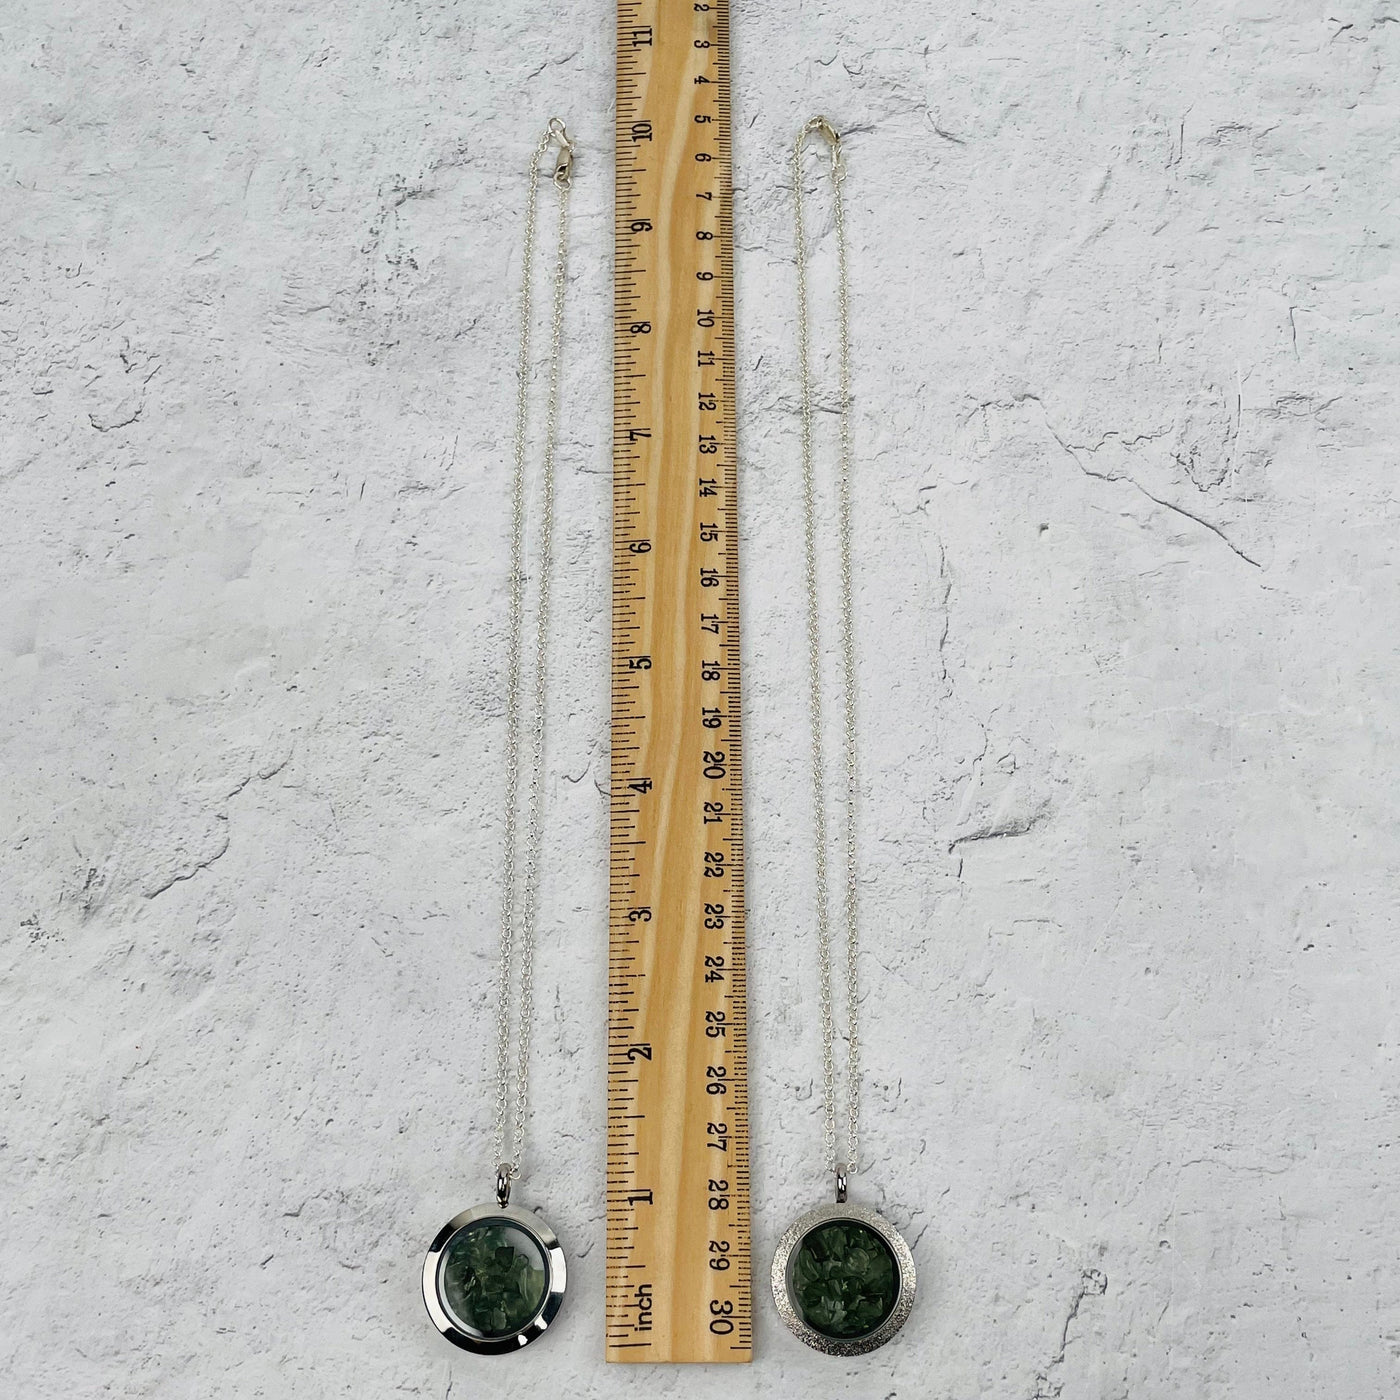 necklaces next to a ruler for size reference 